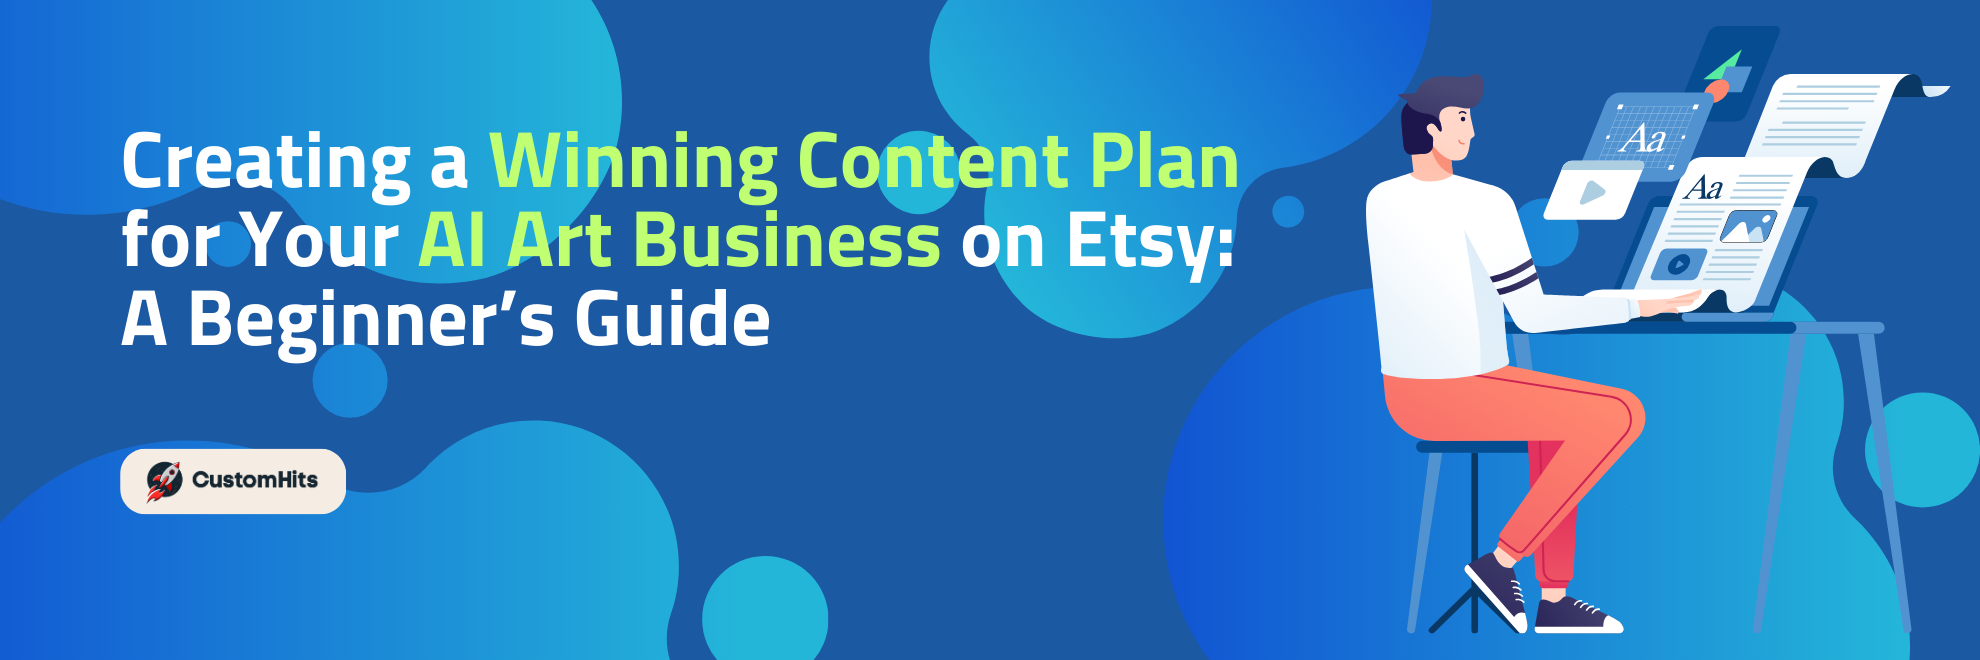 Creating a Winning Content Plan for Your AI Art Business on Etsy: A Beginner’s Guide